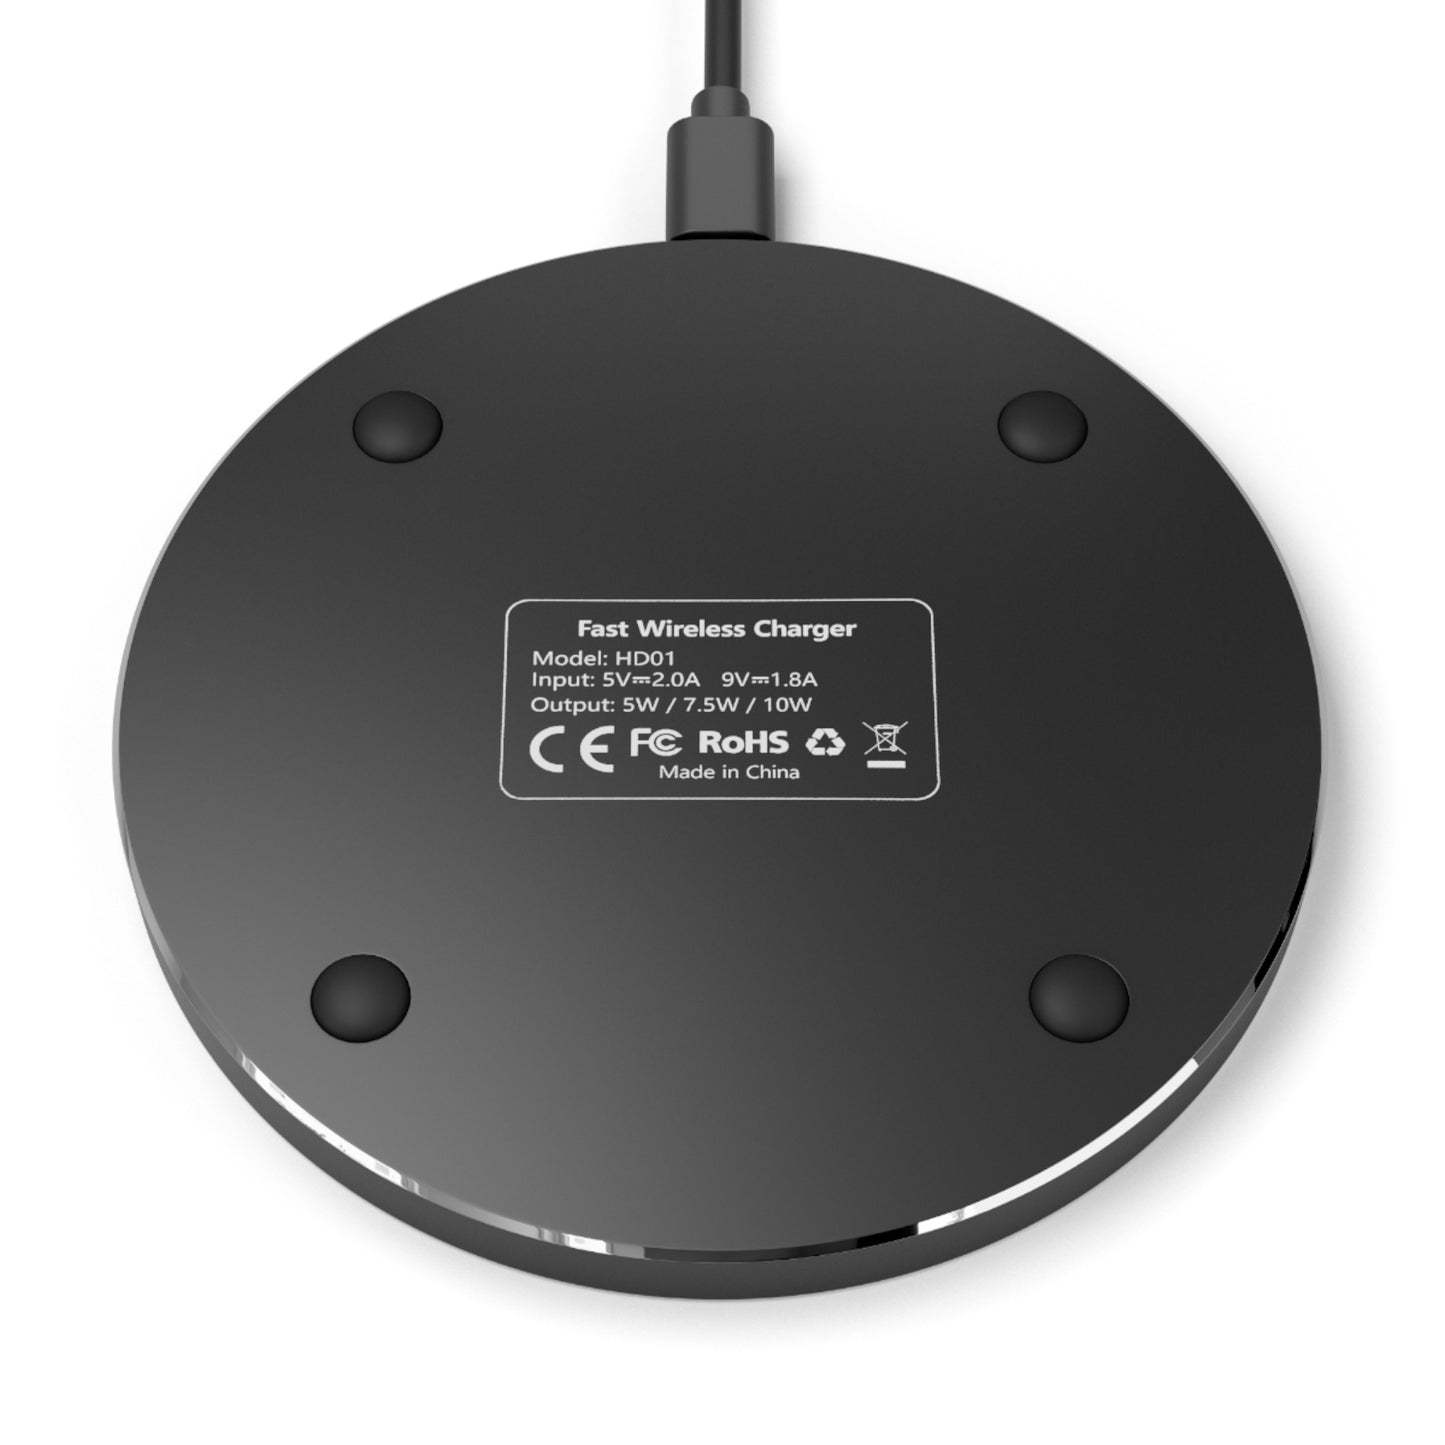 PC GODS Wireless Charger